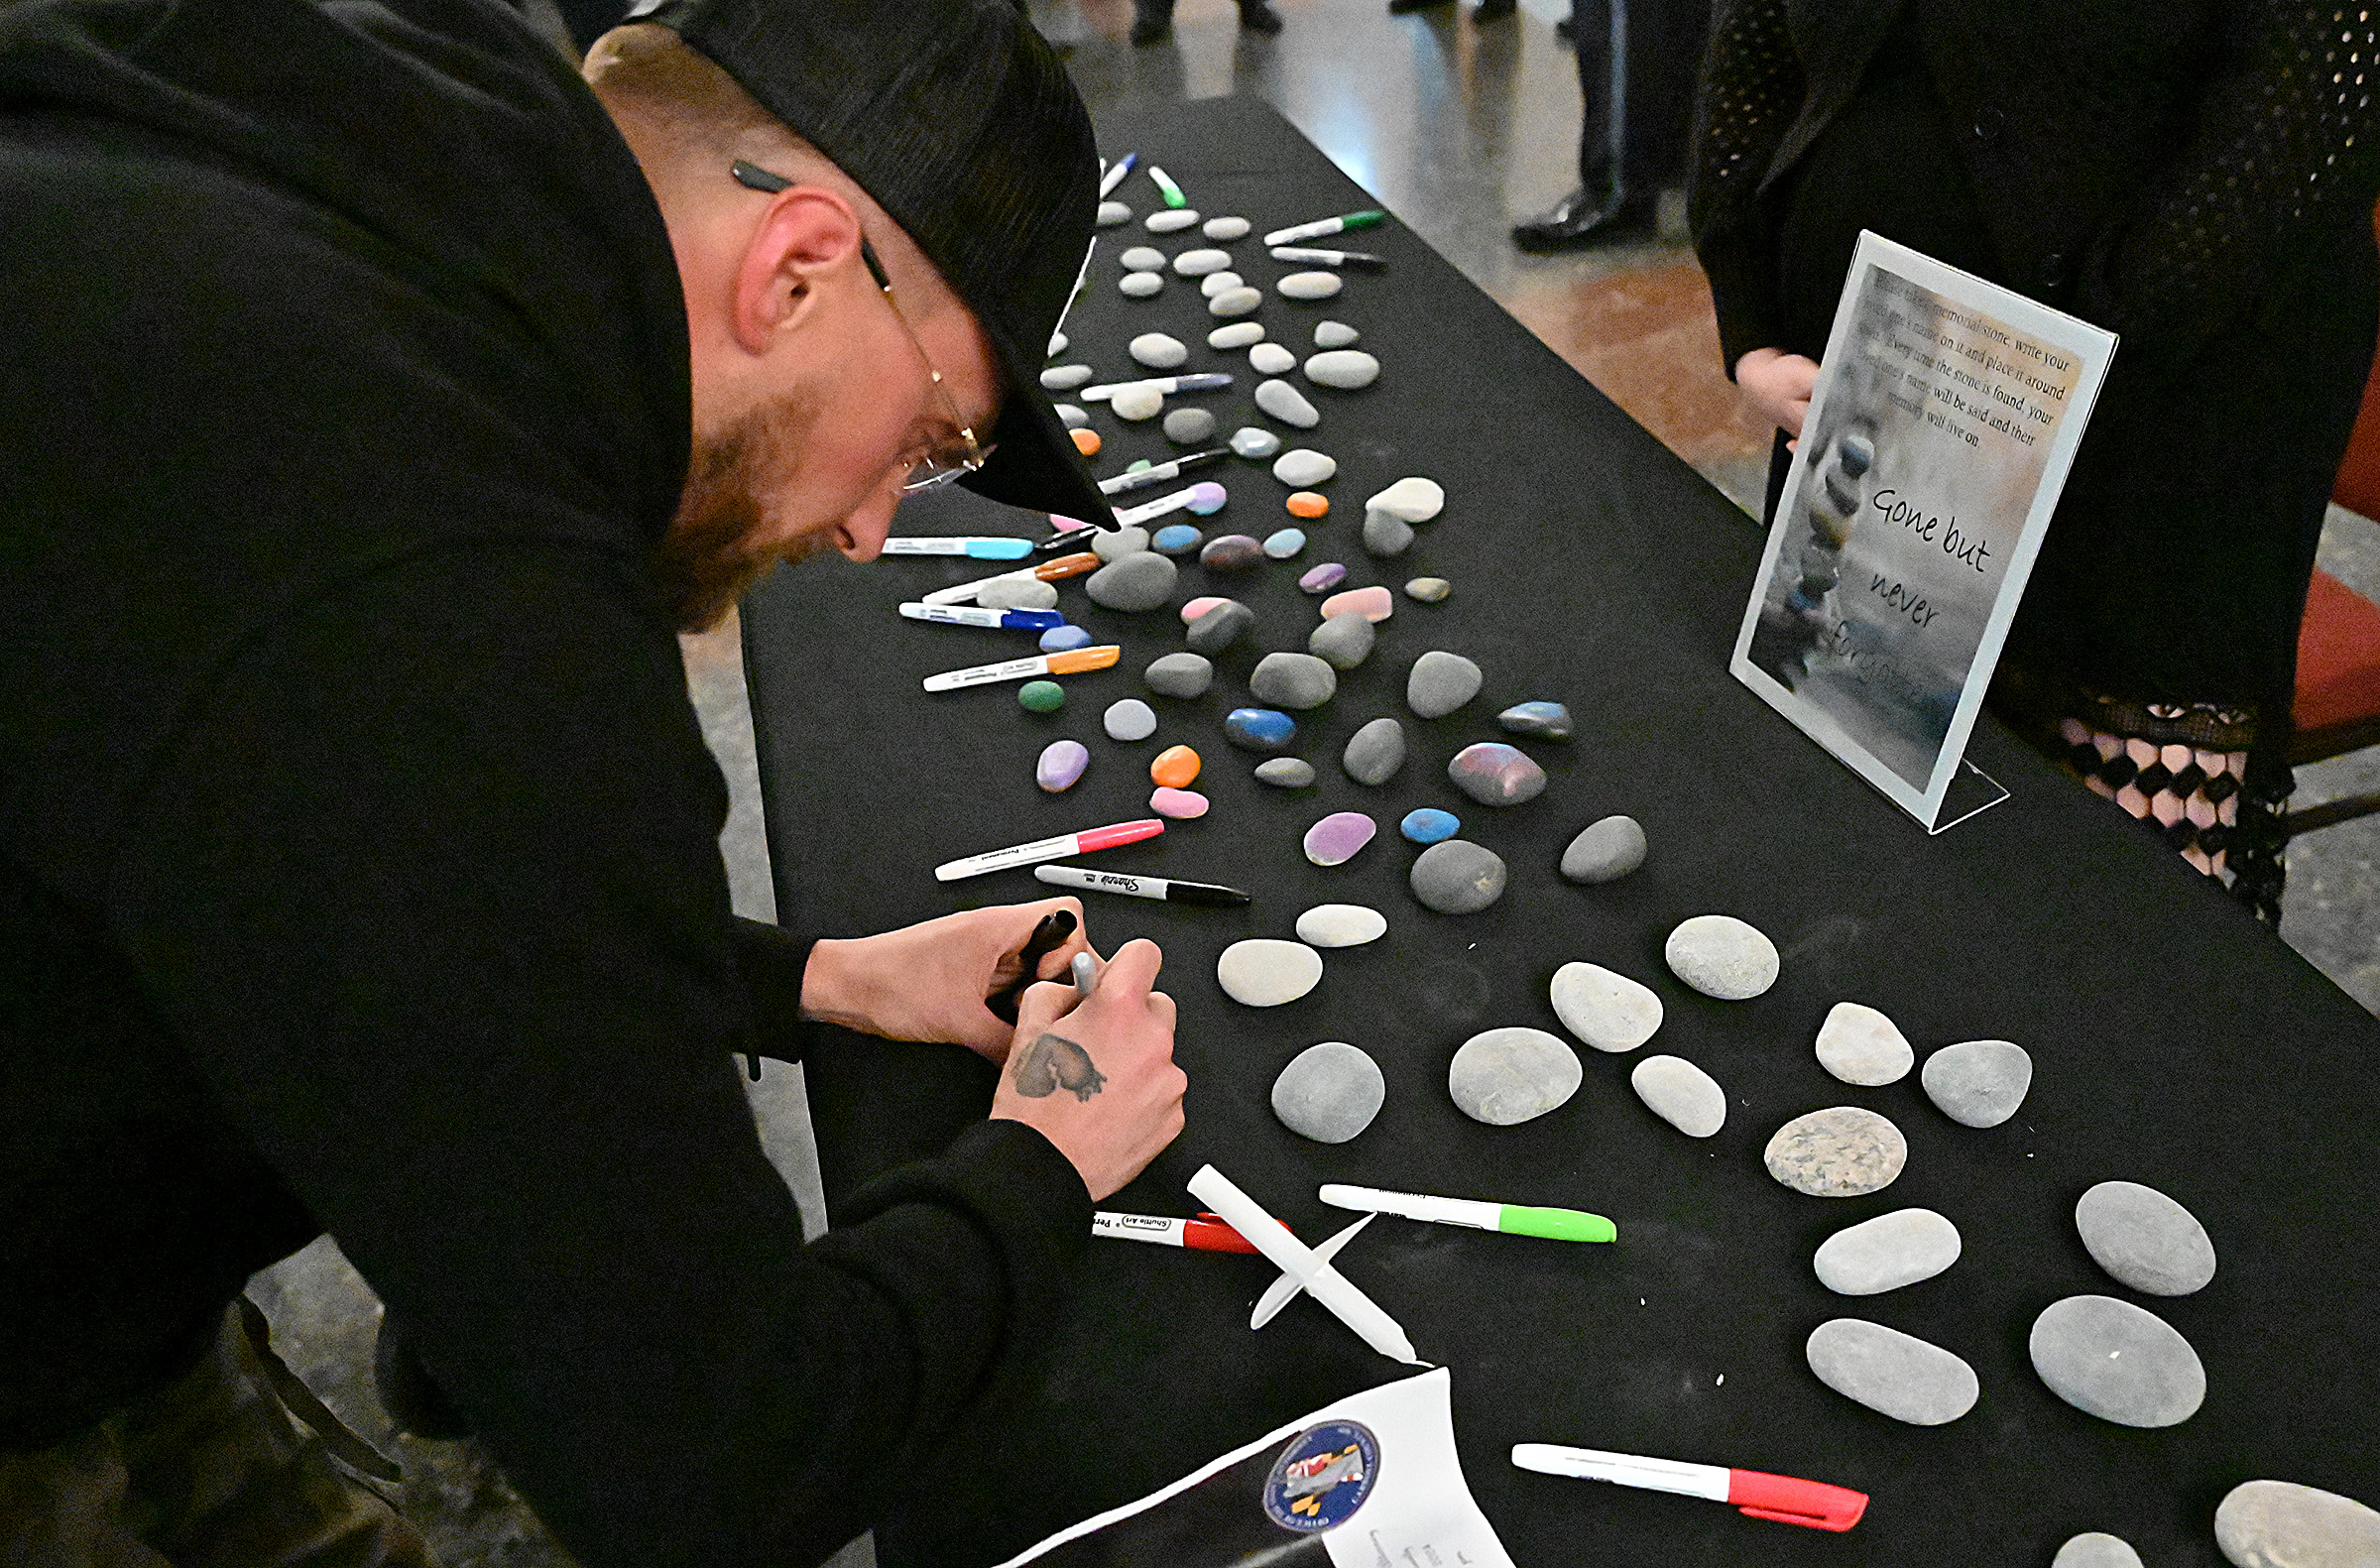 Brandon Stach, 3 years clean, creates a Memory Stone for his many friends lost to drug overdose. The State's Attorney's office hosted Carroll County's 9th Annual Drug Overdose and Prevention Vigil Tuesday at Portico at St. John in Westminster. (Jeffrey F. Bill/Staff photo)